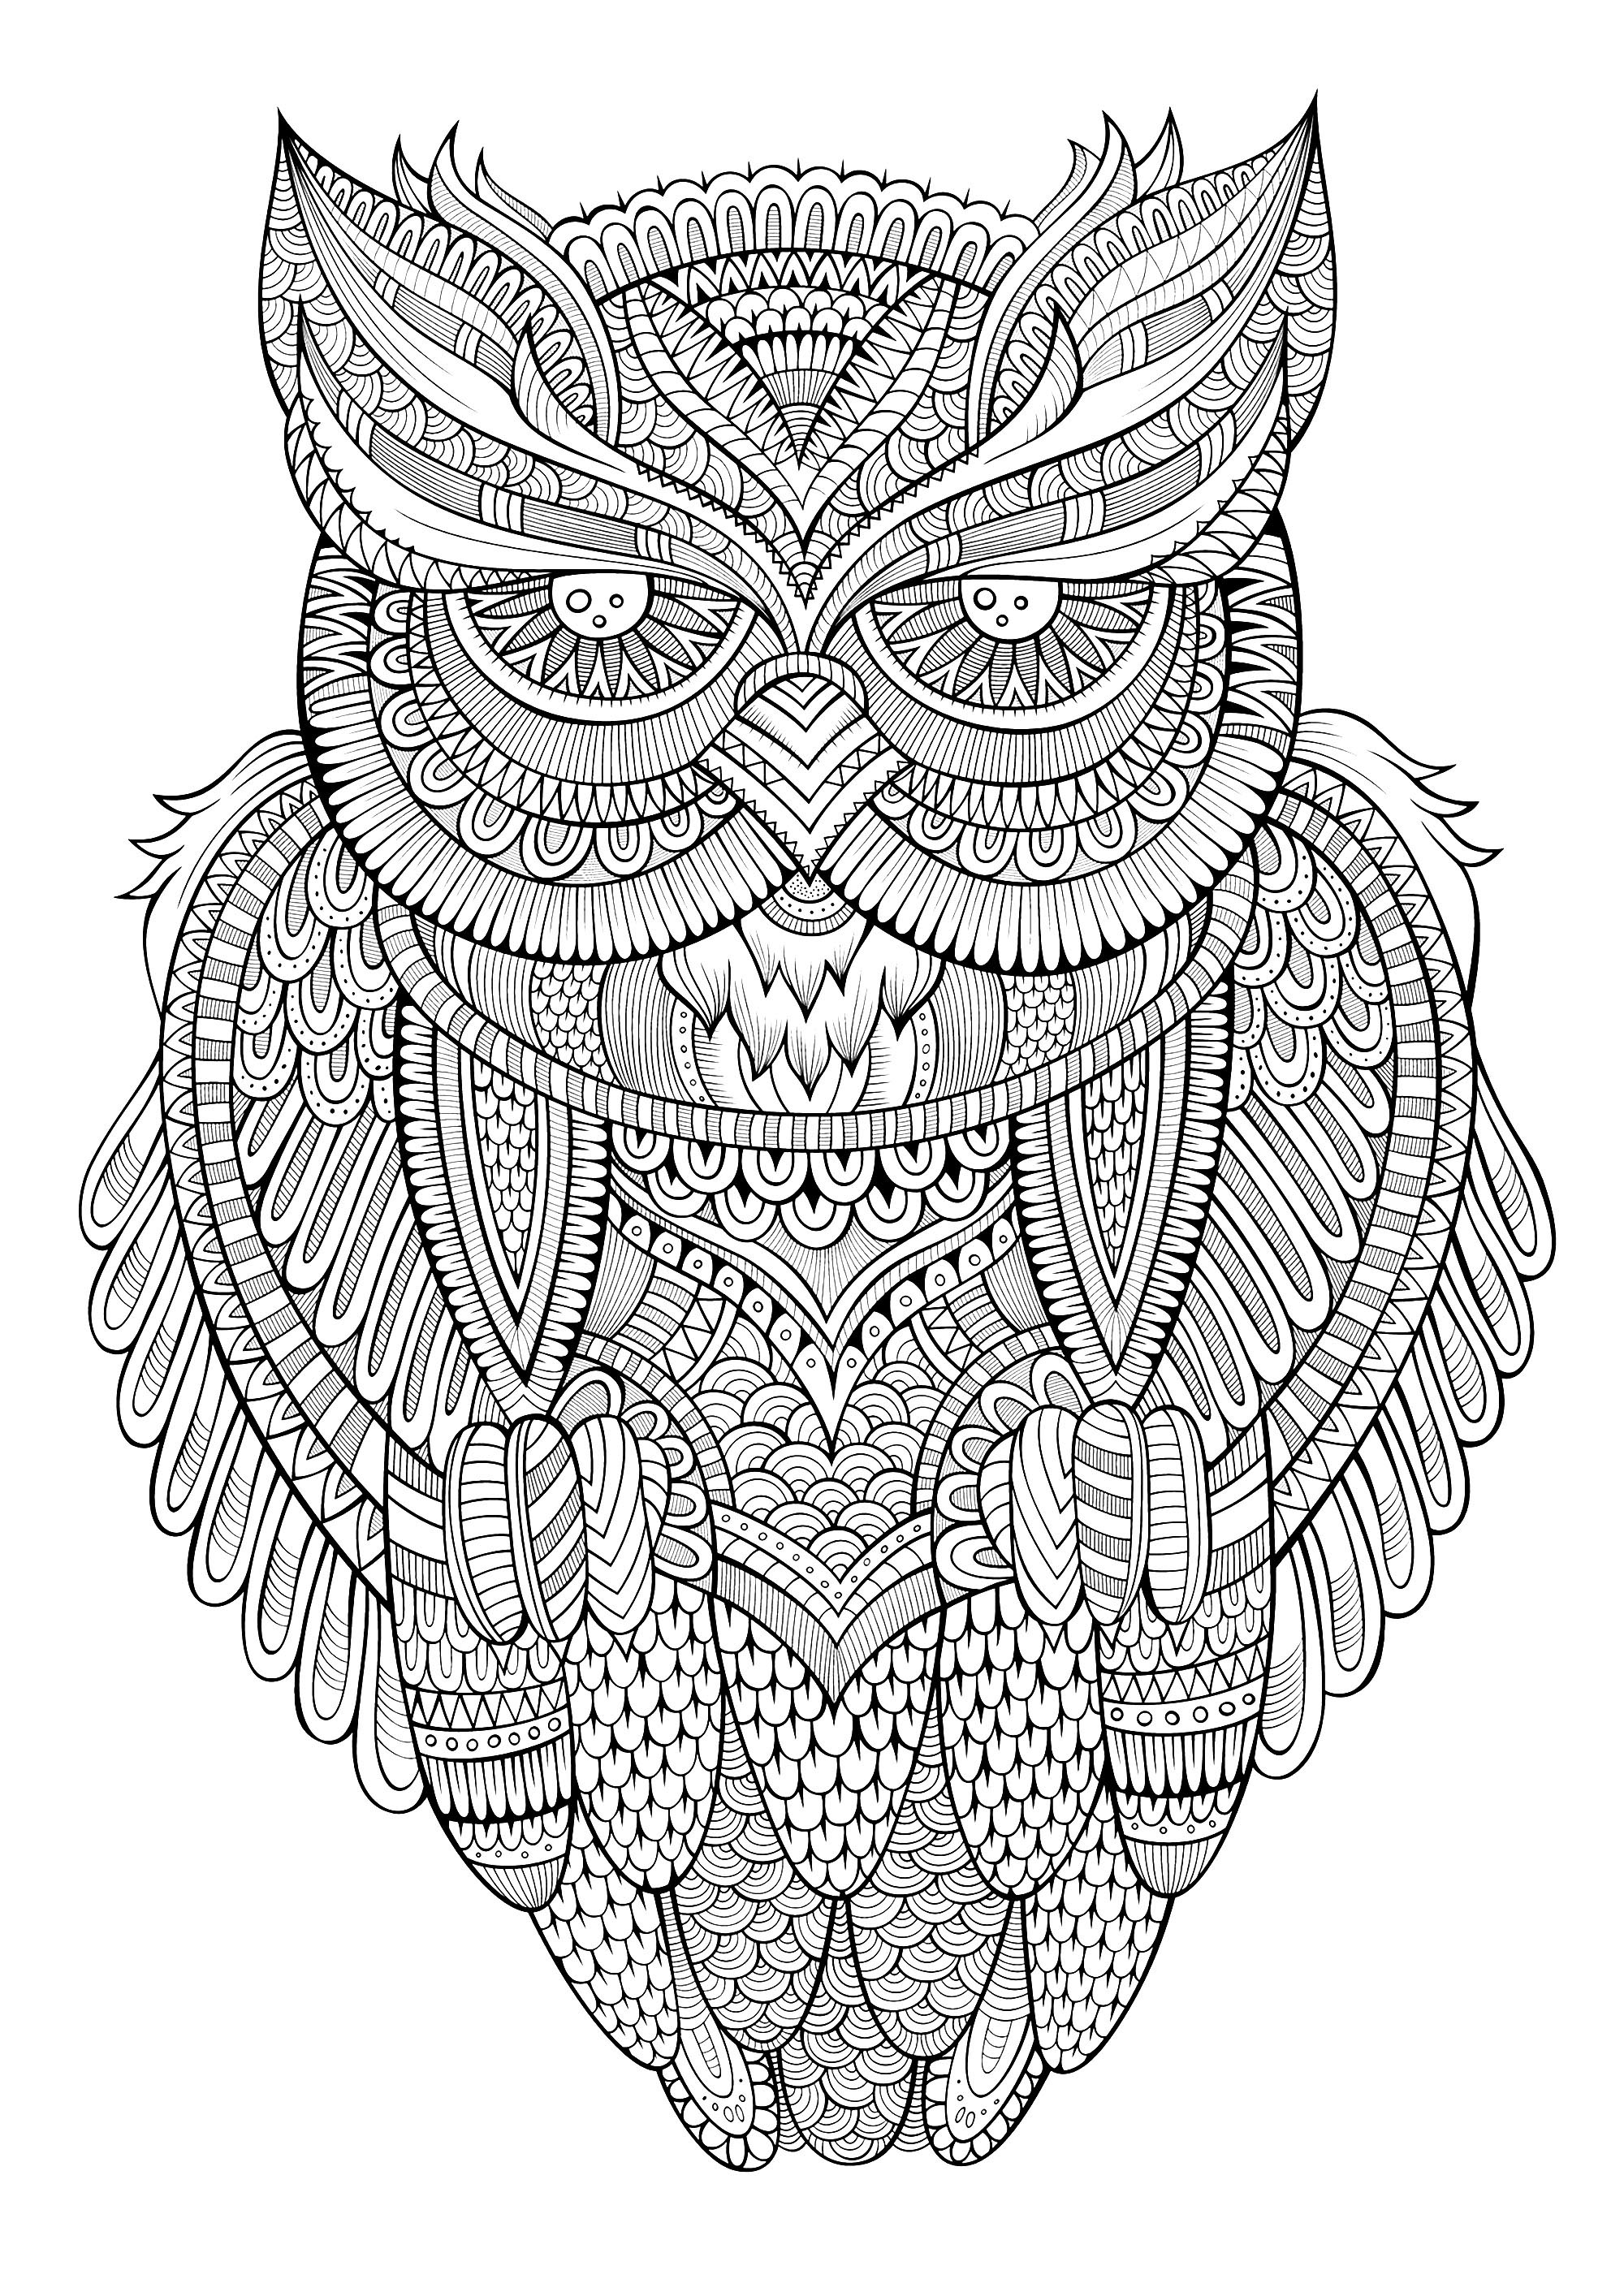 Owl filled with pretty meticulous and regular patterns, Source : 123rf   Artist : Olga Kostenko